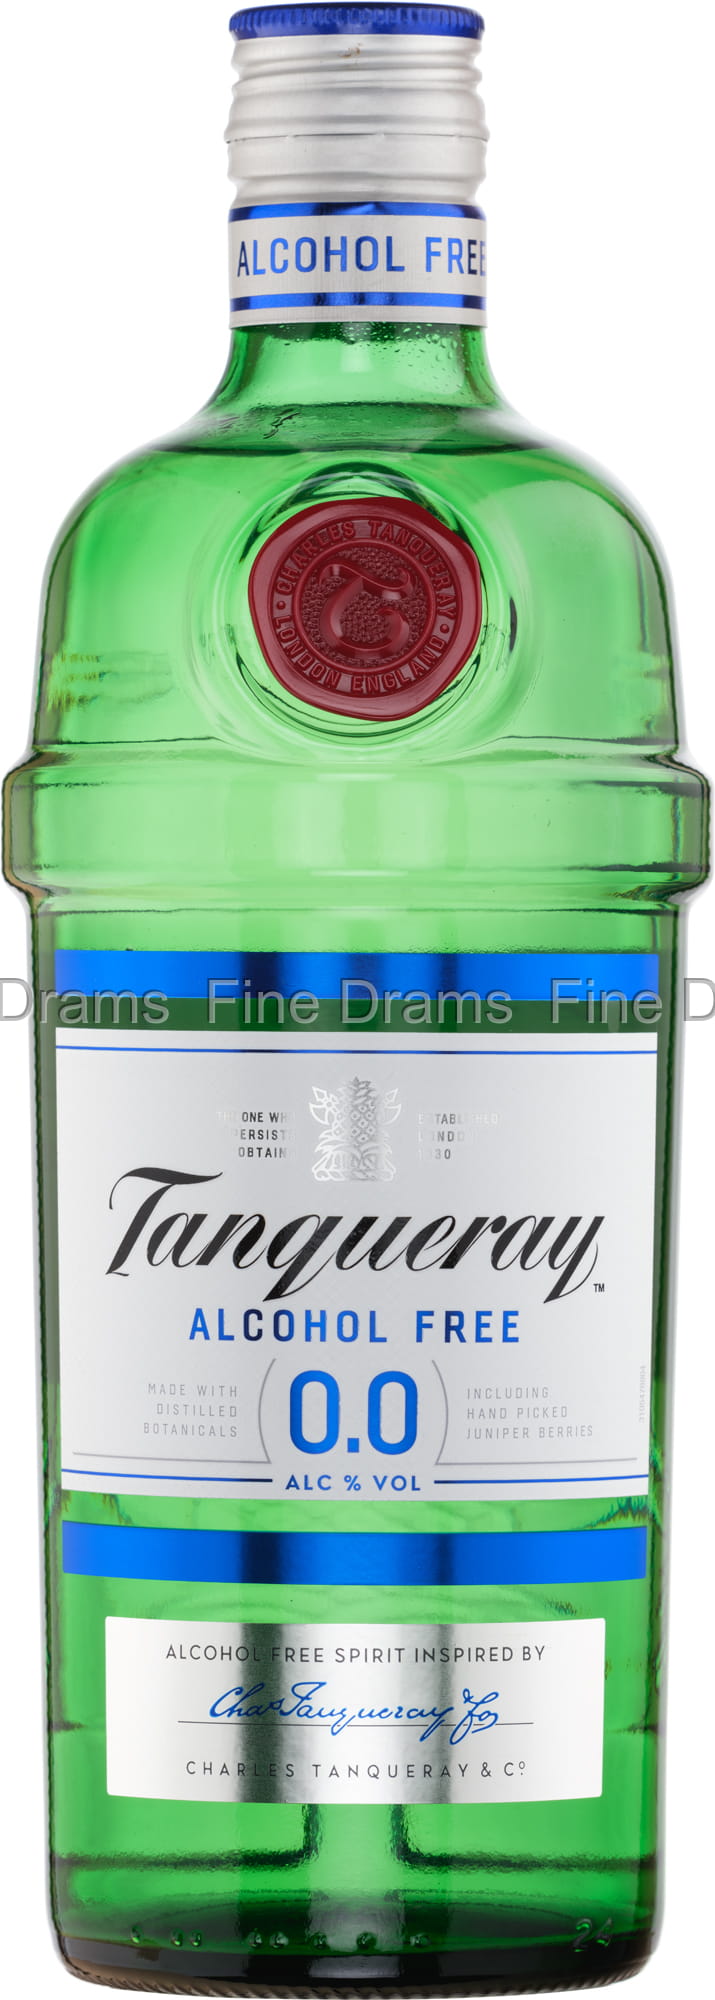 Tanqueray 0.0% Alcohol Free Gin